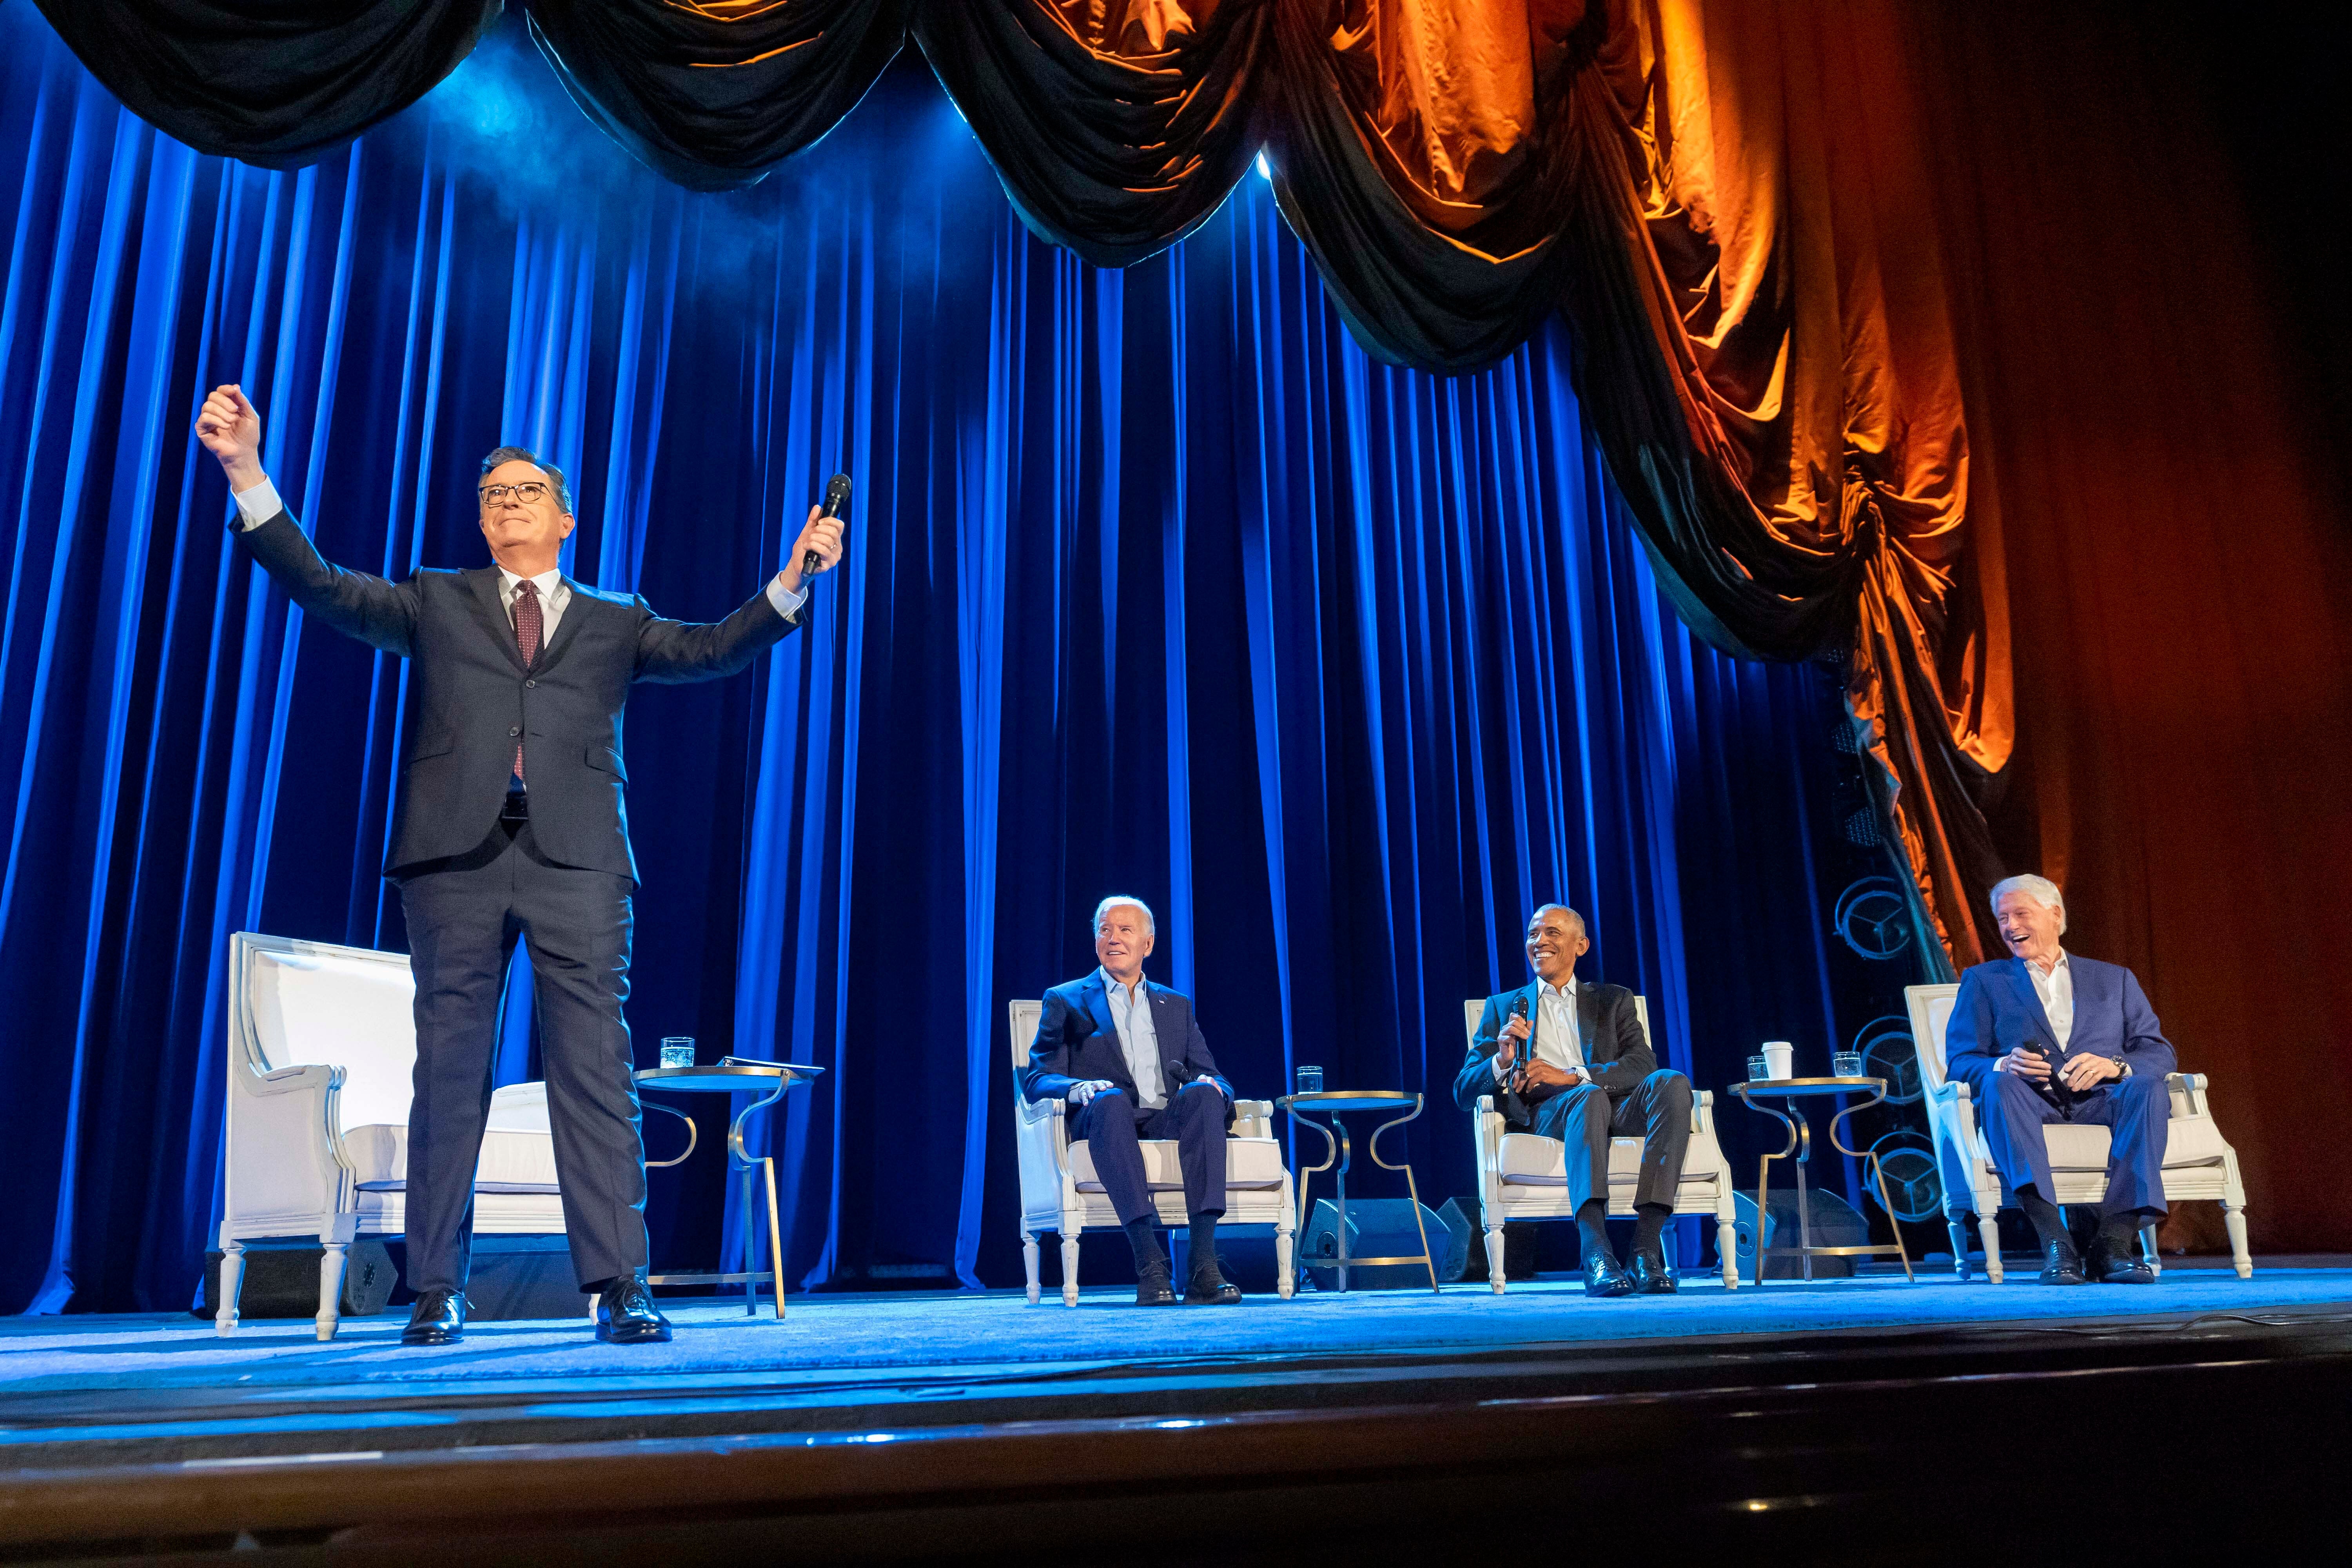 Stephen Colbert moderated the fundraiser featuring a rare appearance by a serving president and two of his fellow Democratic predecessors